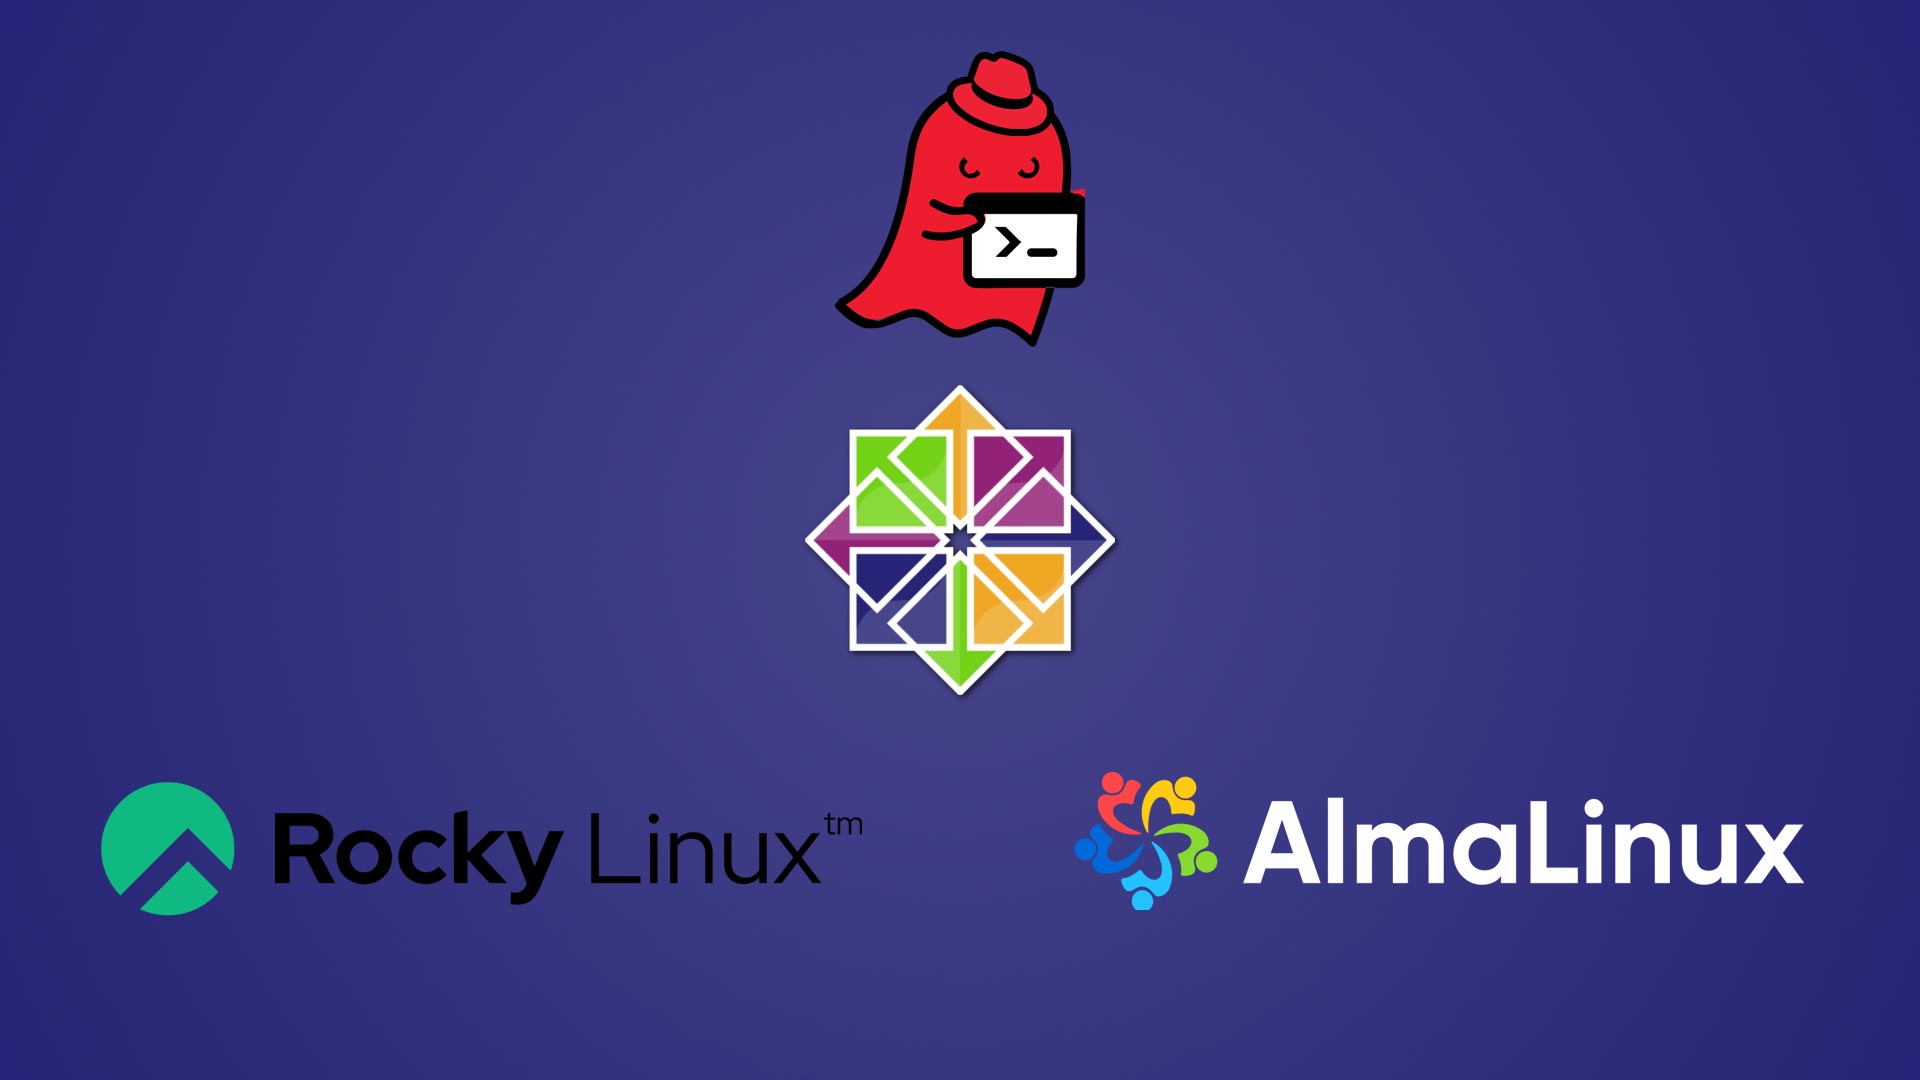 Rocky Linux and AlmaLinux are available to download